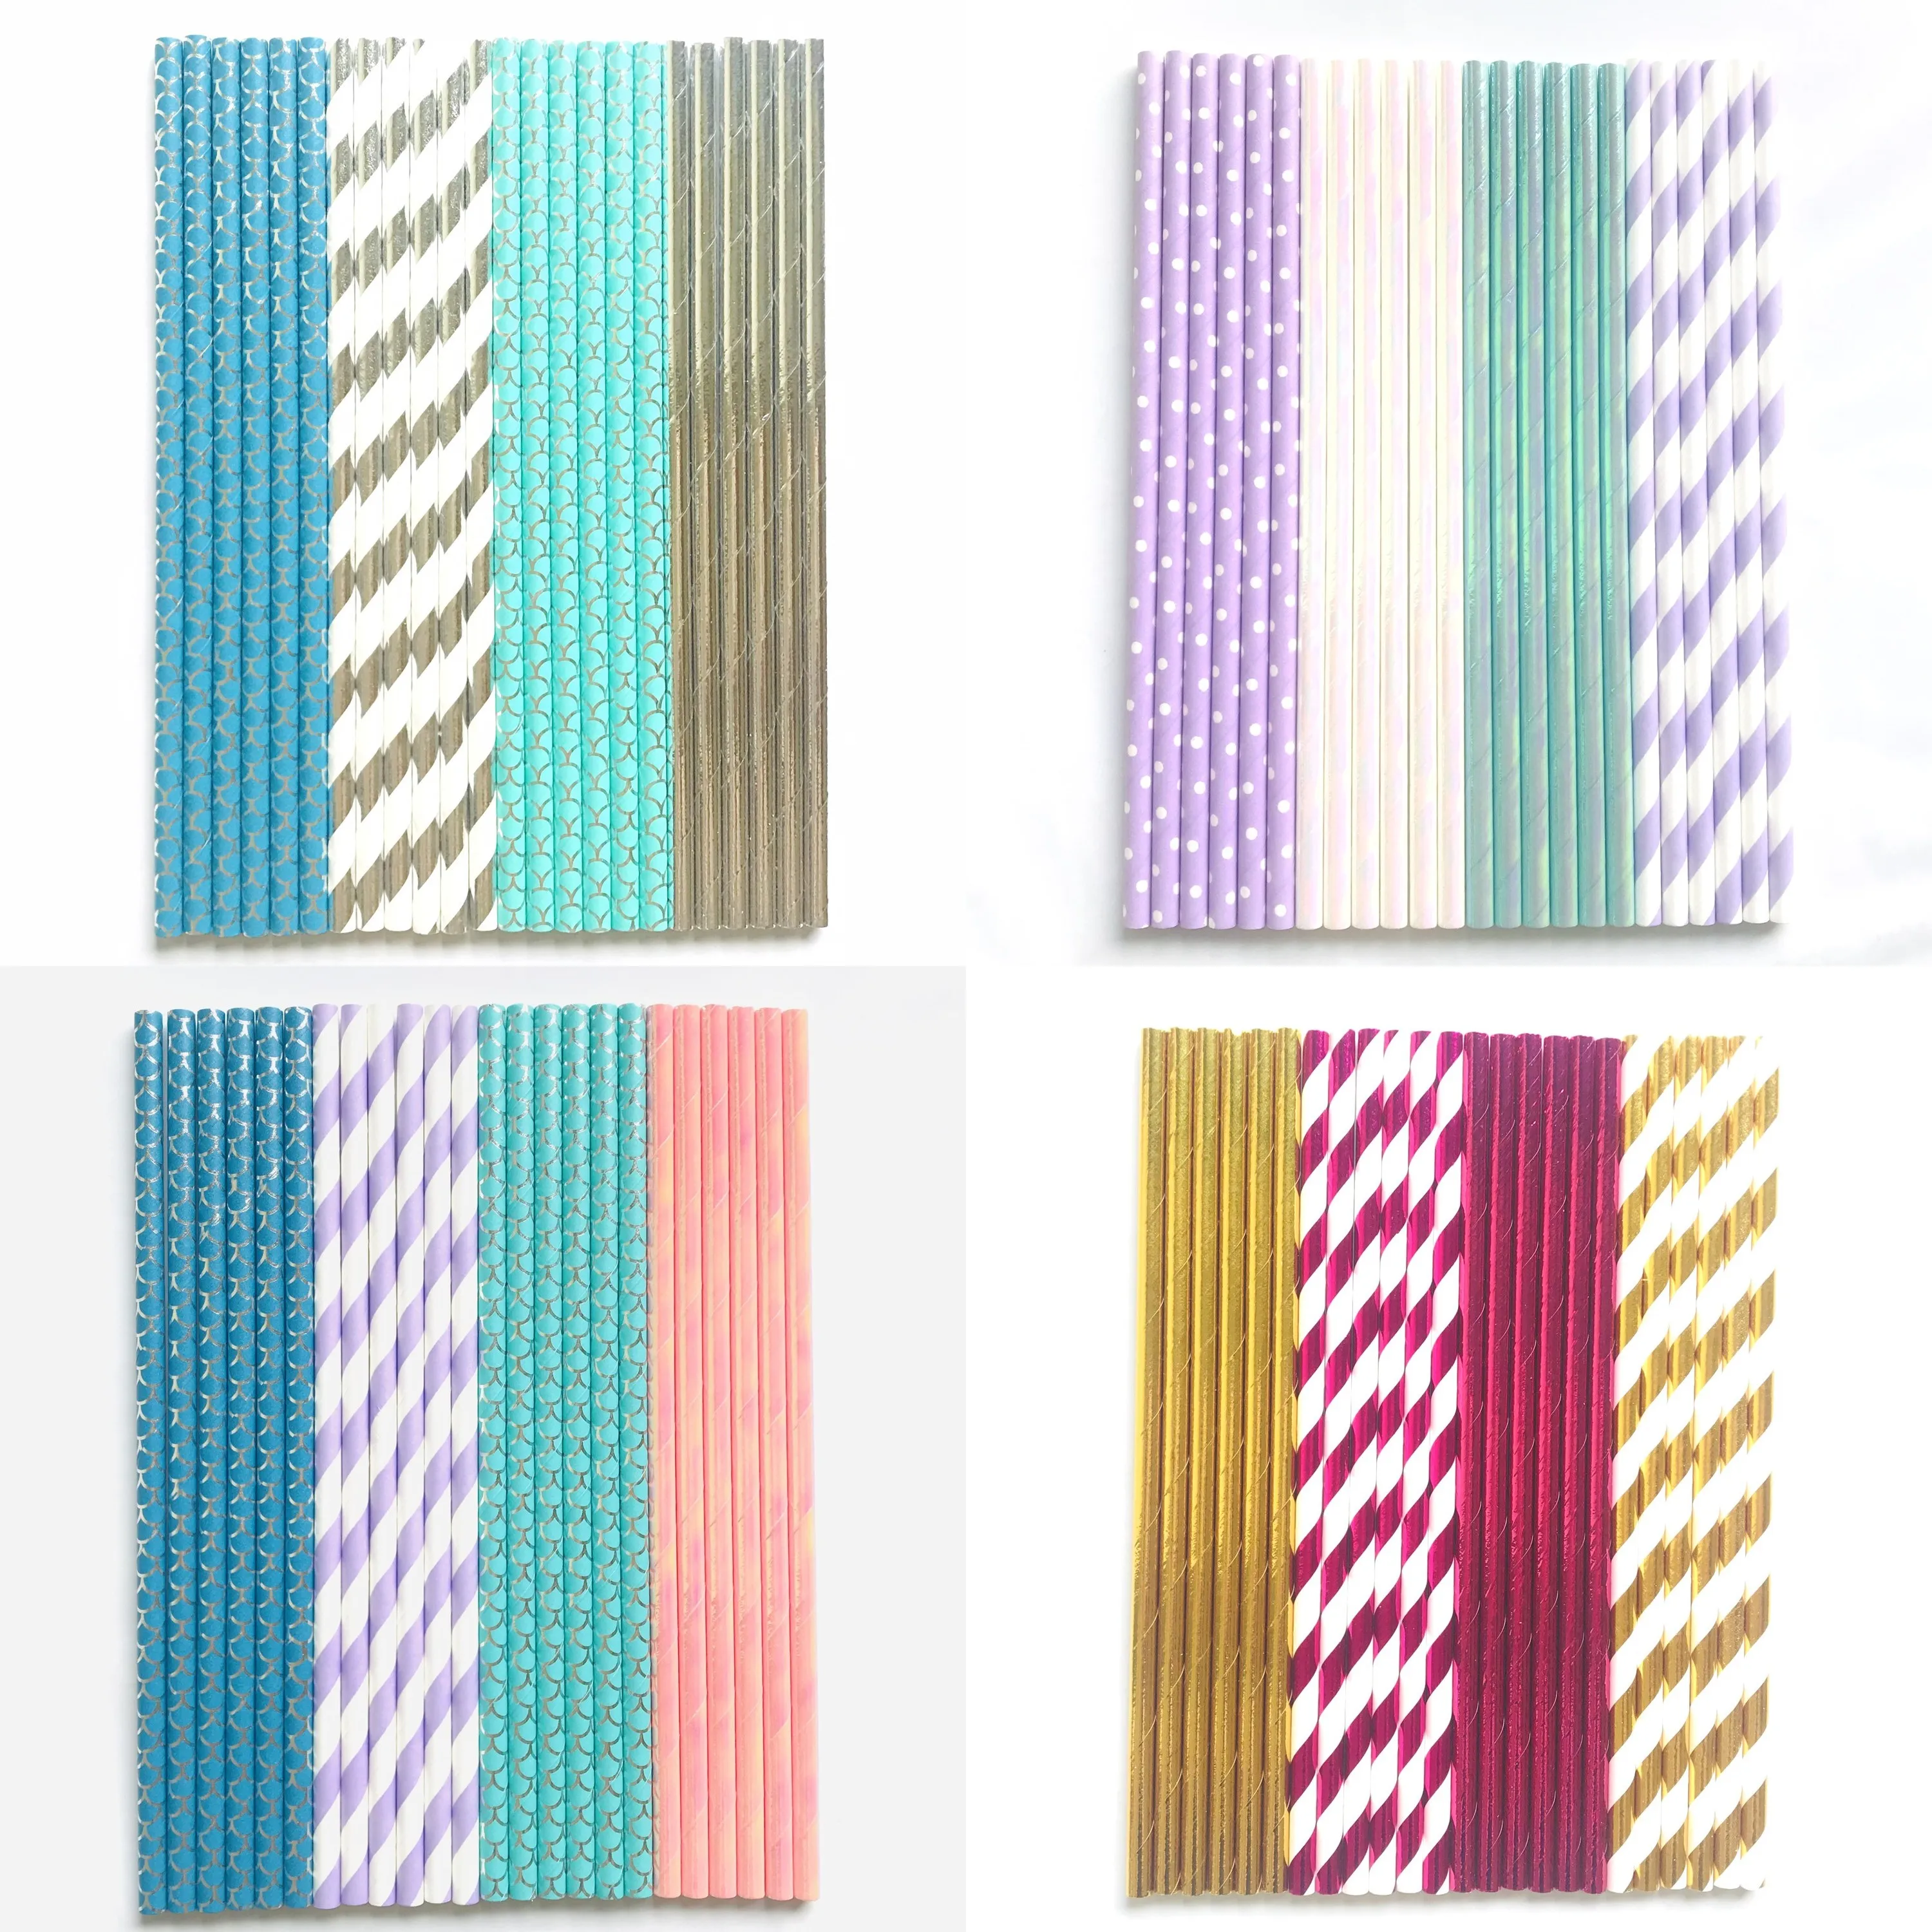 

100 Pcs Under The Sea Party Paper Straws,Lilac Aqua Blue Pink Gold Silver Foil Iridescent Fish Scale Beach Pool Girl Baby Shower